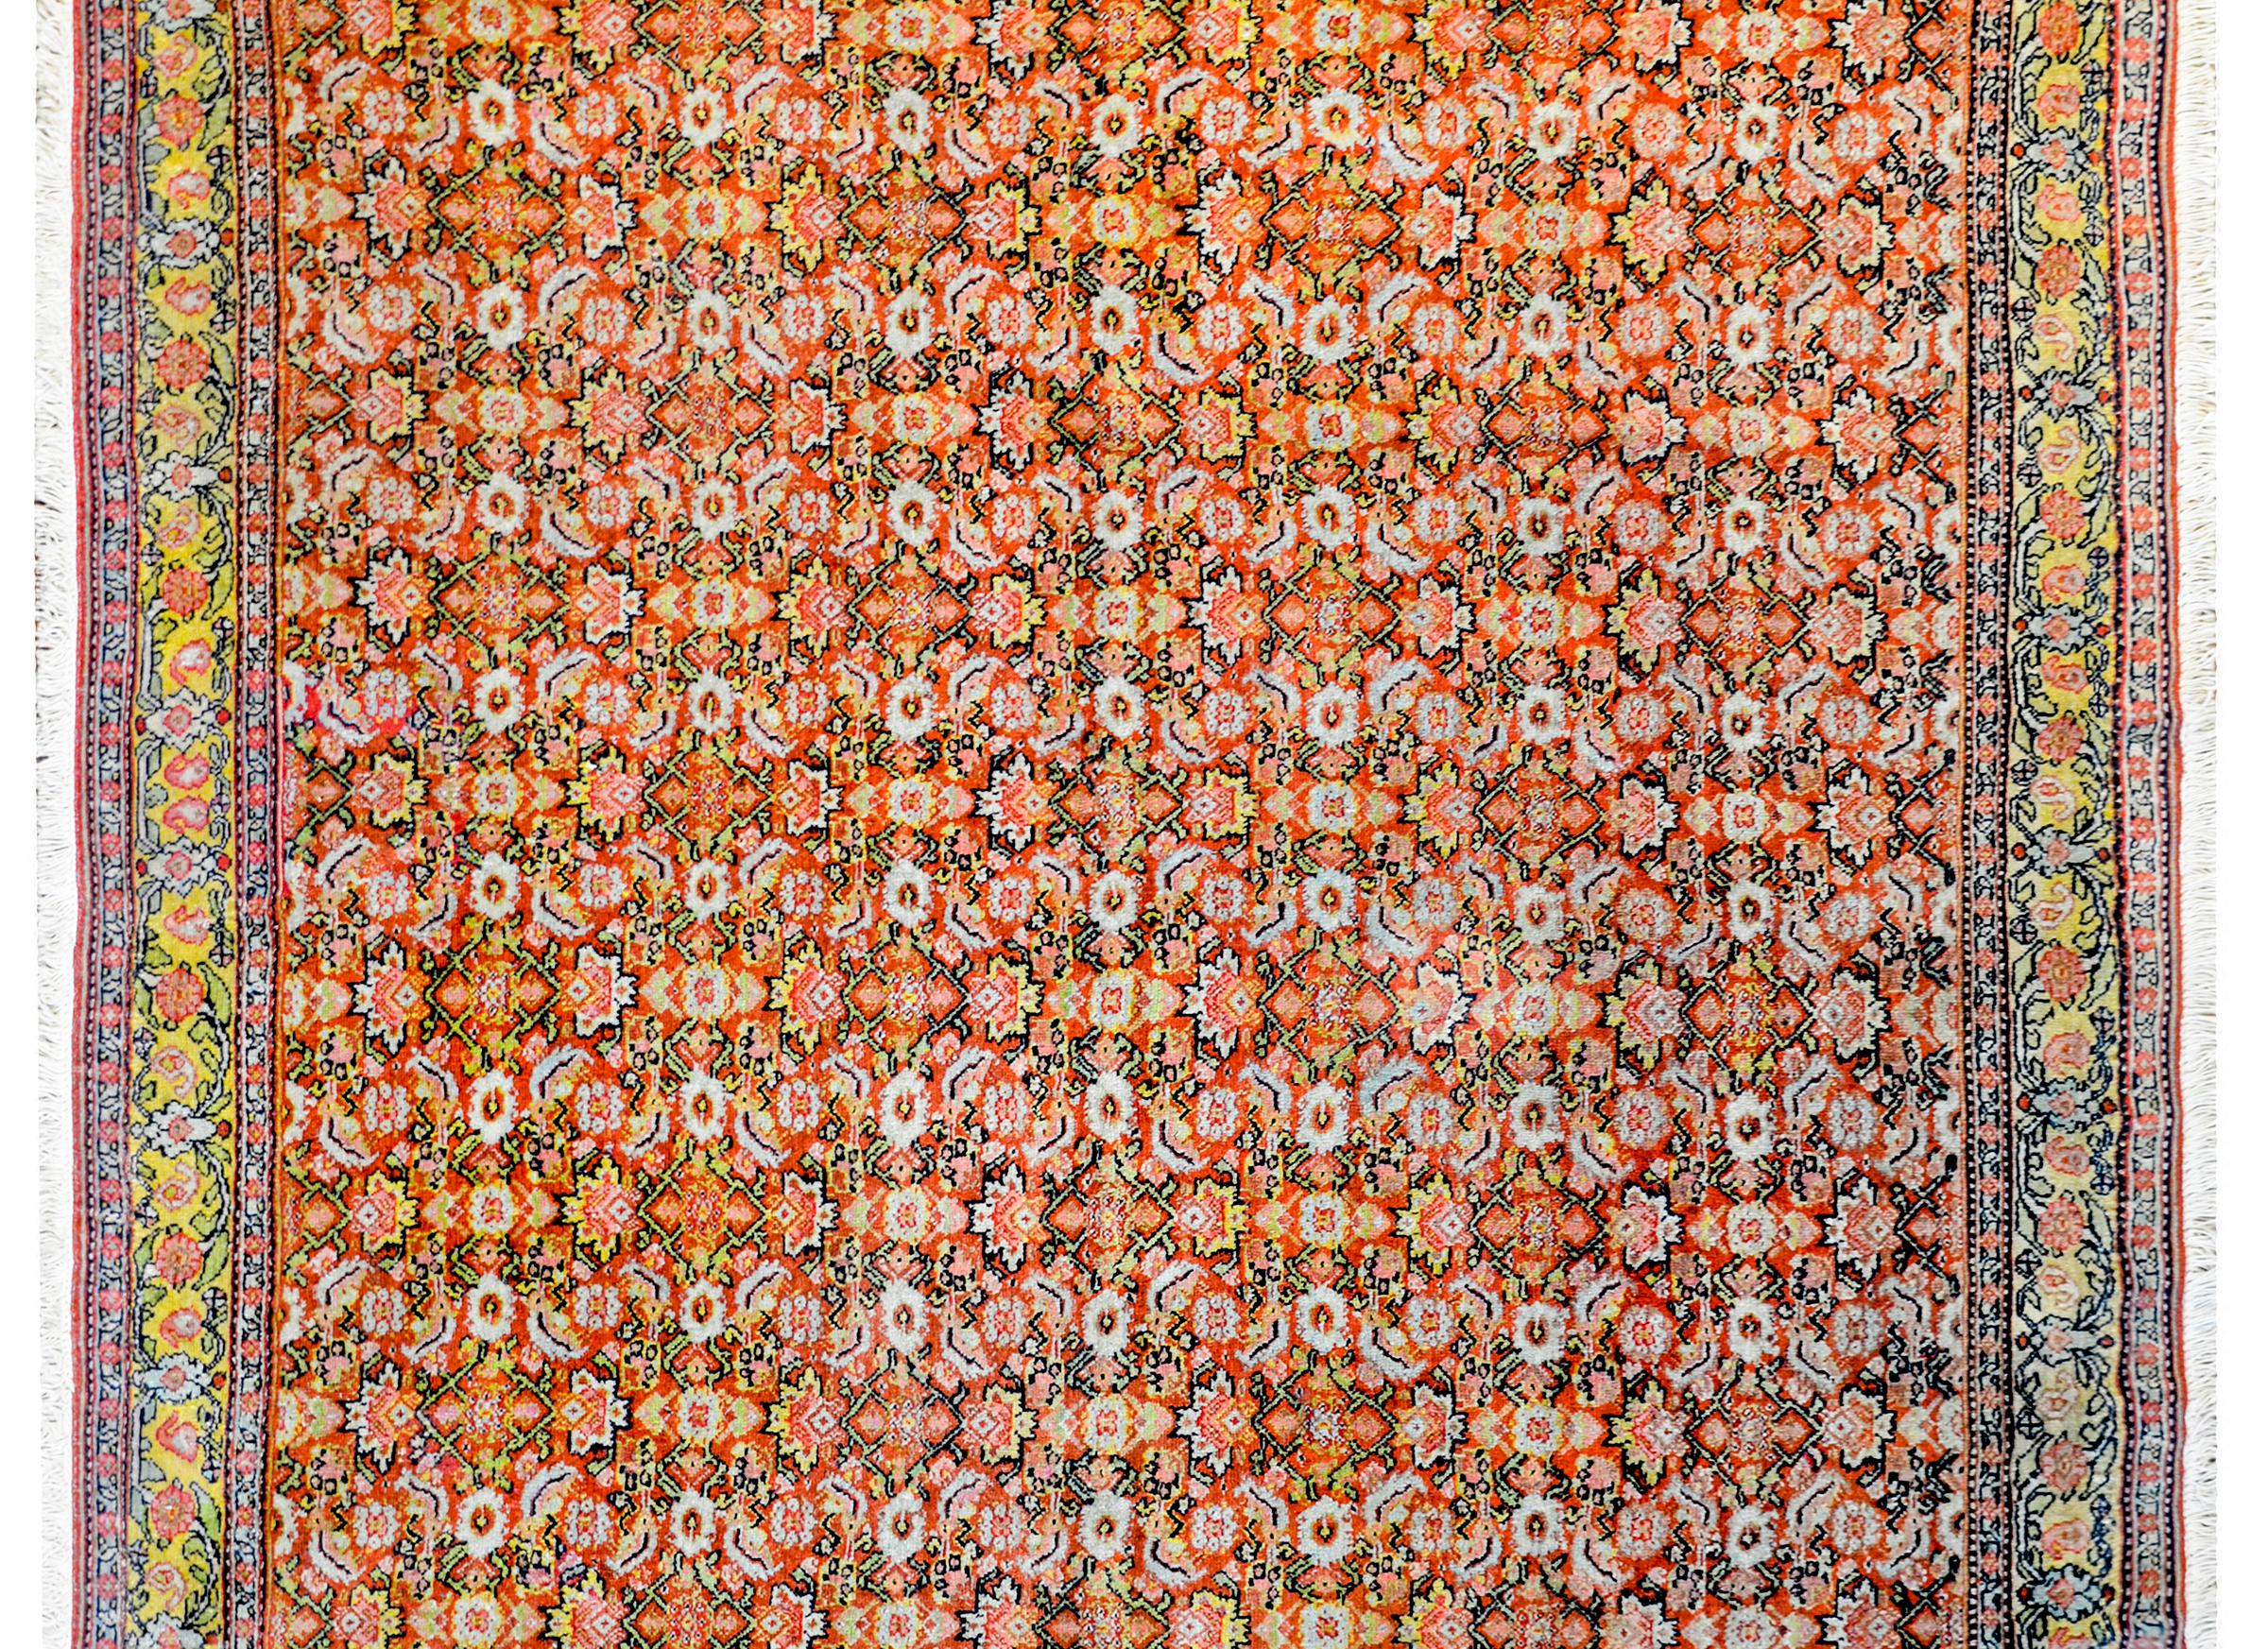 An incredible early 20th century Persian Senneh rug with an intensely woven pattern containing an all-over trellis of flowers, leaves, and vines woven in brilliant orange, gold, white, green, and black vegetable dyed wool. The border is wide with a